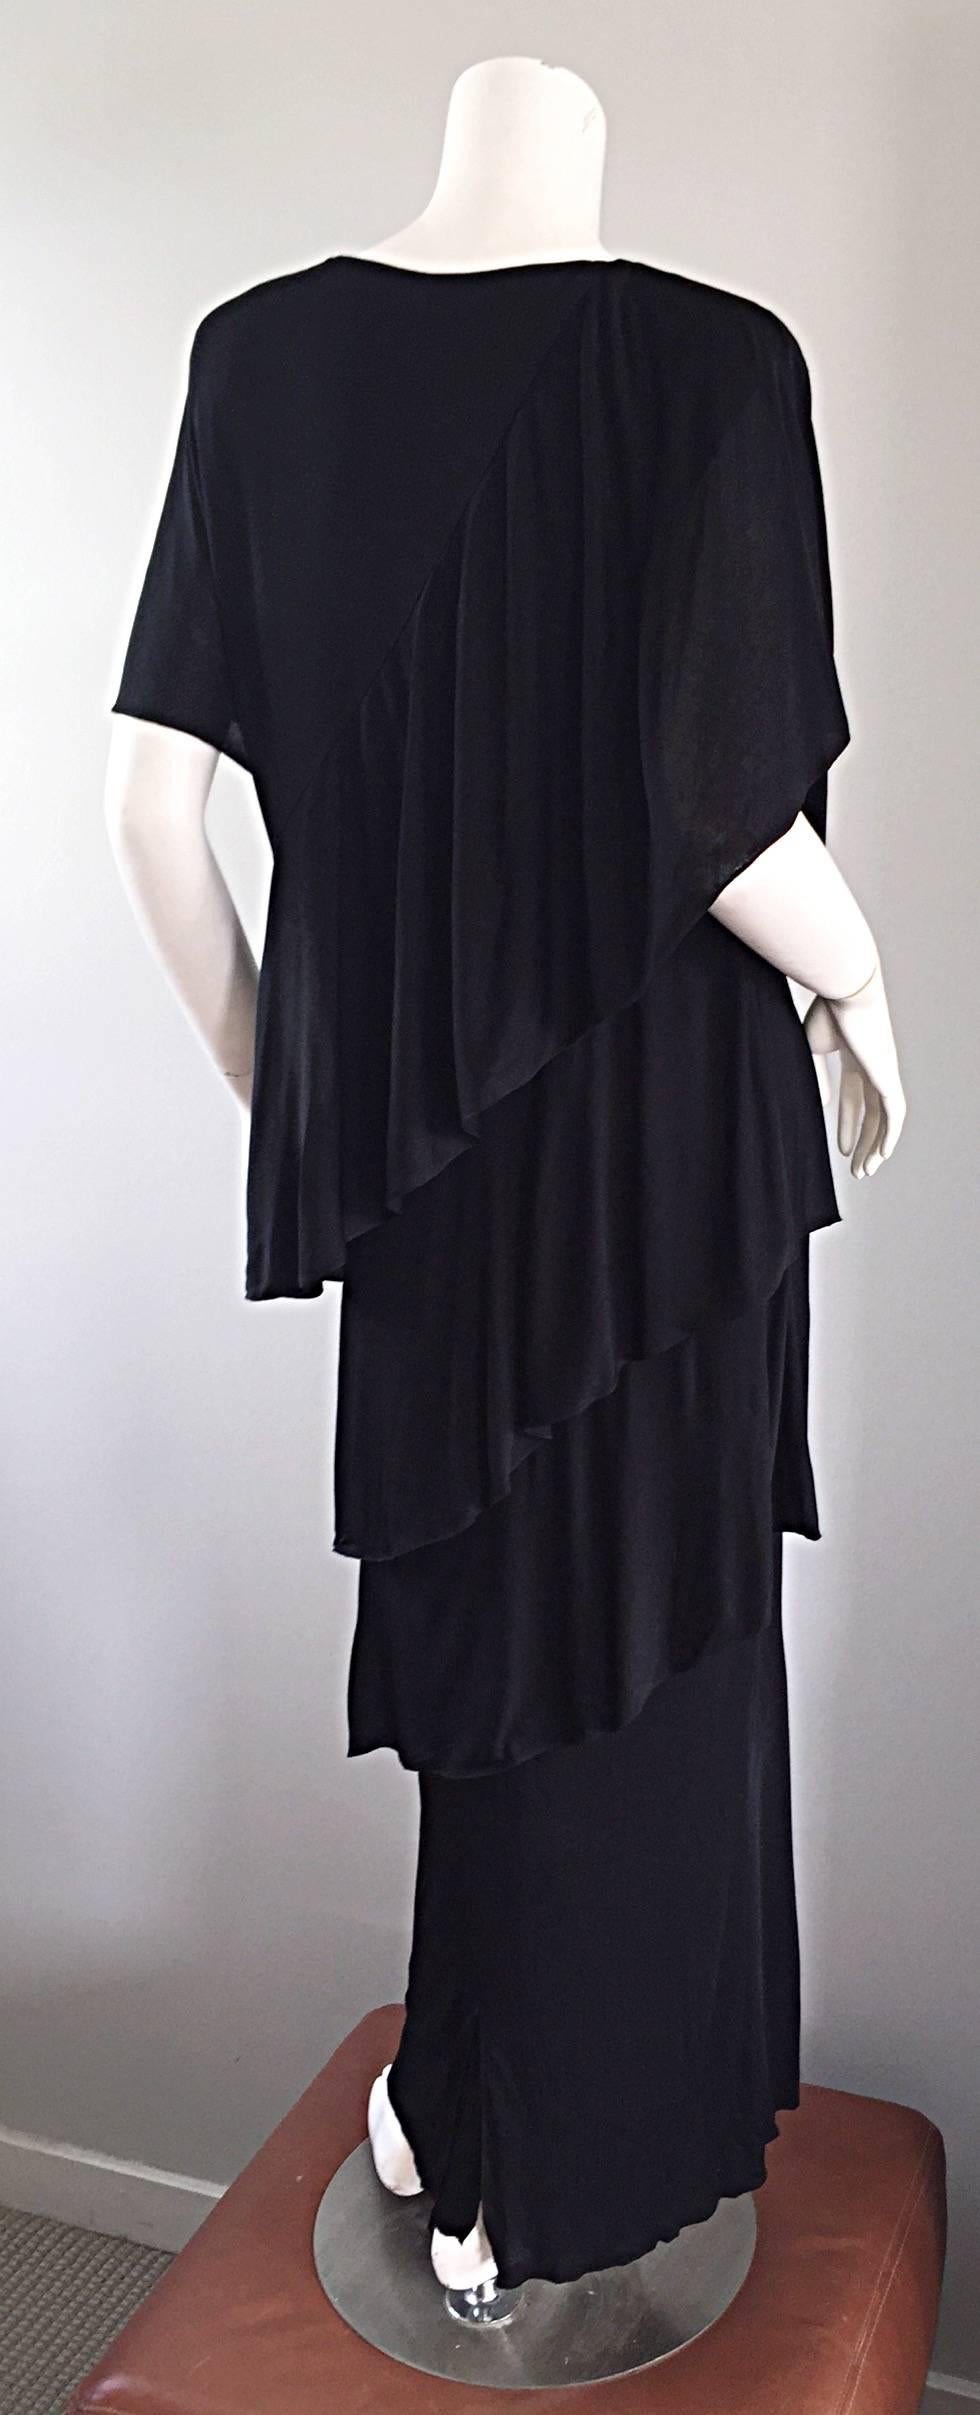 Vintage Holly's Harp Black Silk Jersey Signature Tiered Layered Boho Dress Gown 2